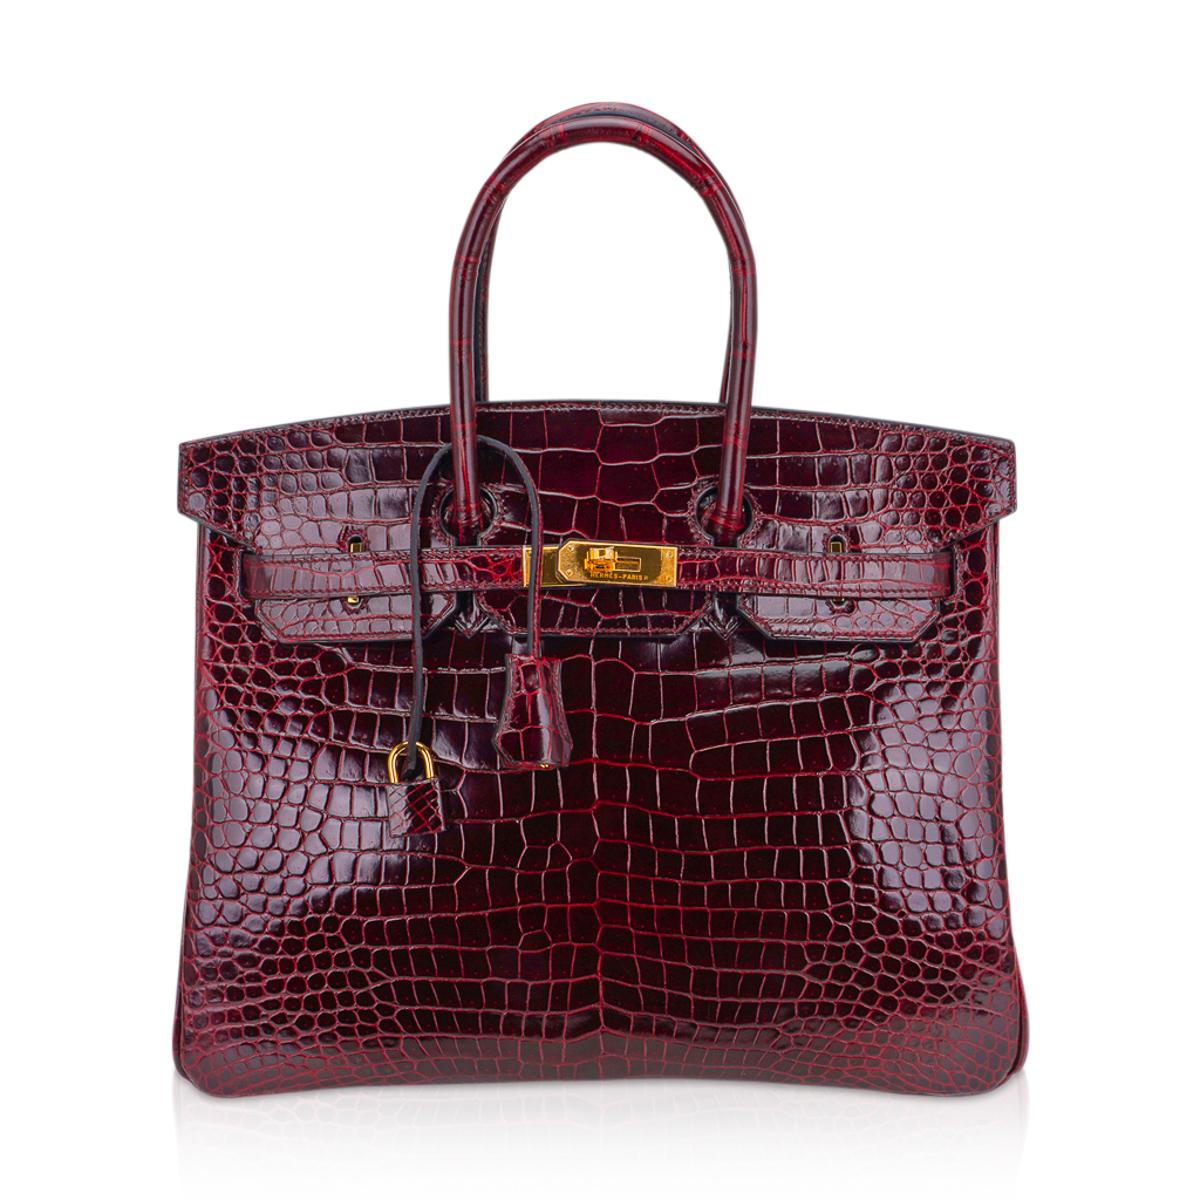 Mightychic offers an Hermes Birkin HSS 35 featured rich Bordeaux in Porosus Crocodile.
An exquisite Hermes crocodile handbag in jewel toned deep Bordeaux.
Accentuated with gold hardware.
This special order genuine crocodile skin bag is a magnificent